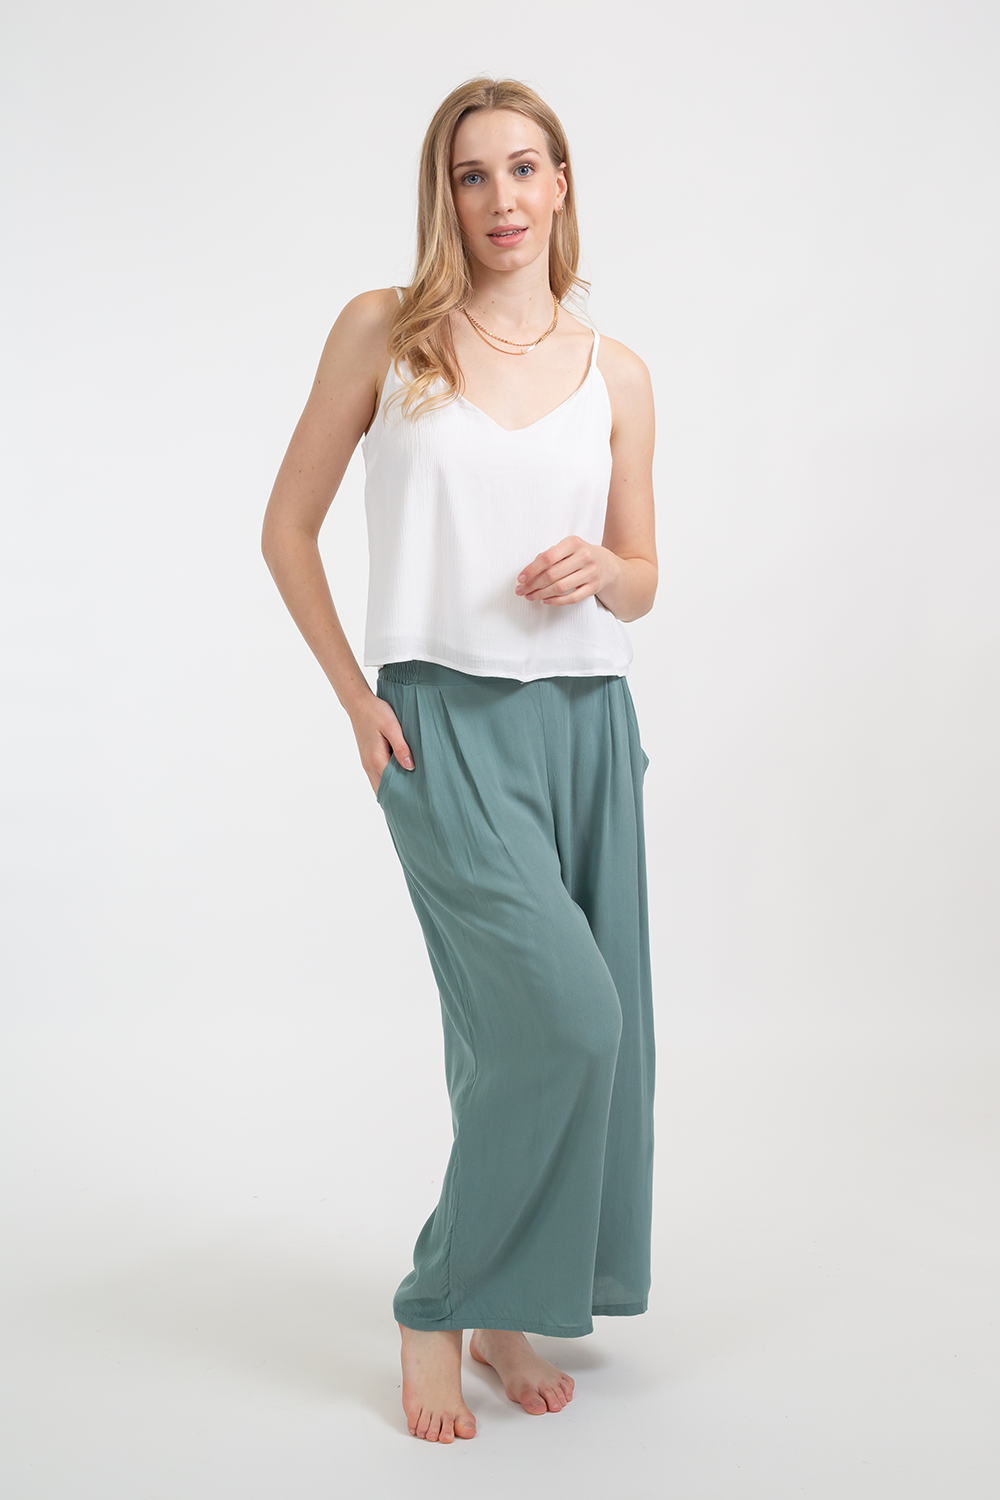 Blonde model wearing the white soft Miami Camisole top with adjustable straps and v-neckline facing front. Paired with crinkle rayon jade green Miami pants by Koy Resort Cruise summer beachwear collection.